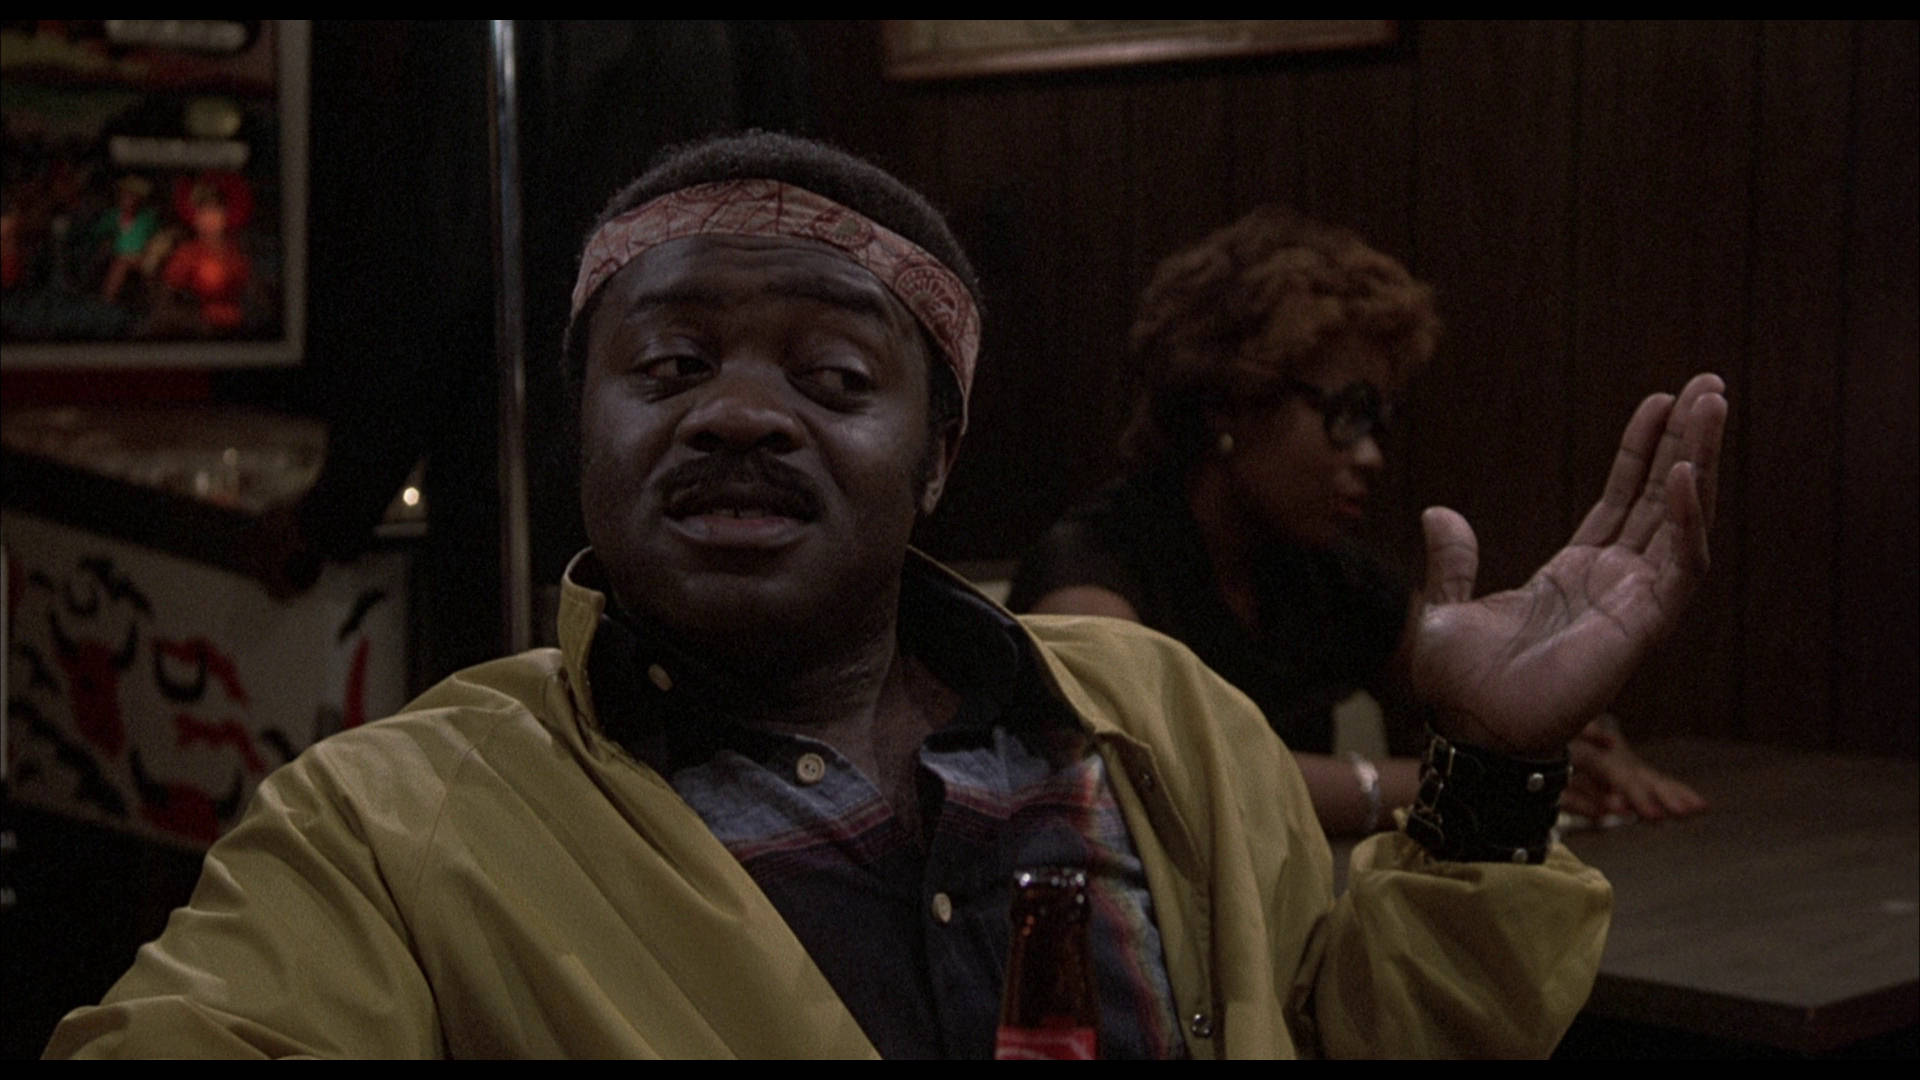 Yaphet Kotto In A 70s Outfit Wallpaper